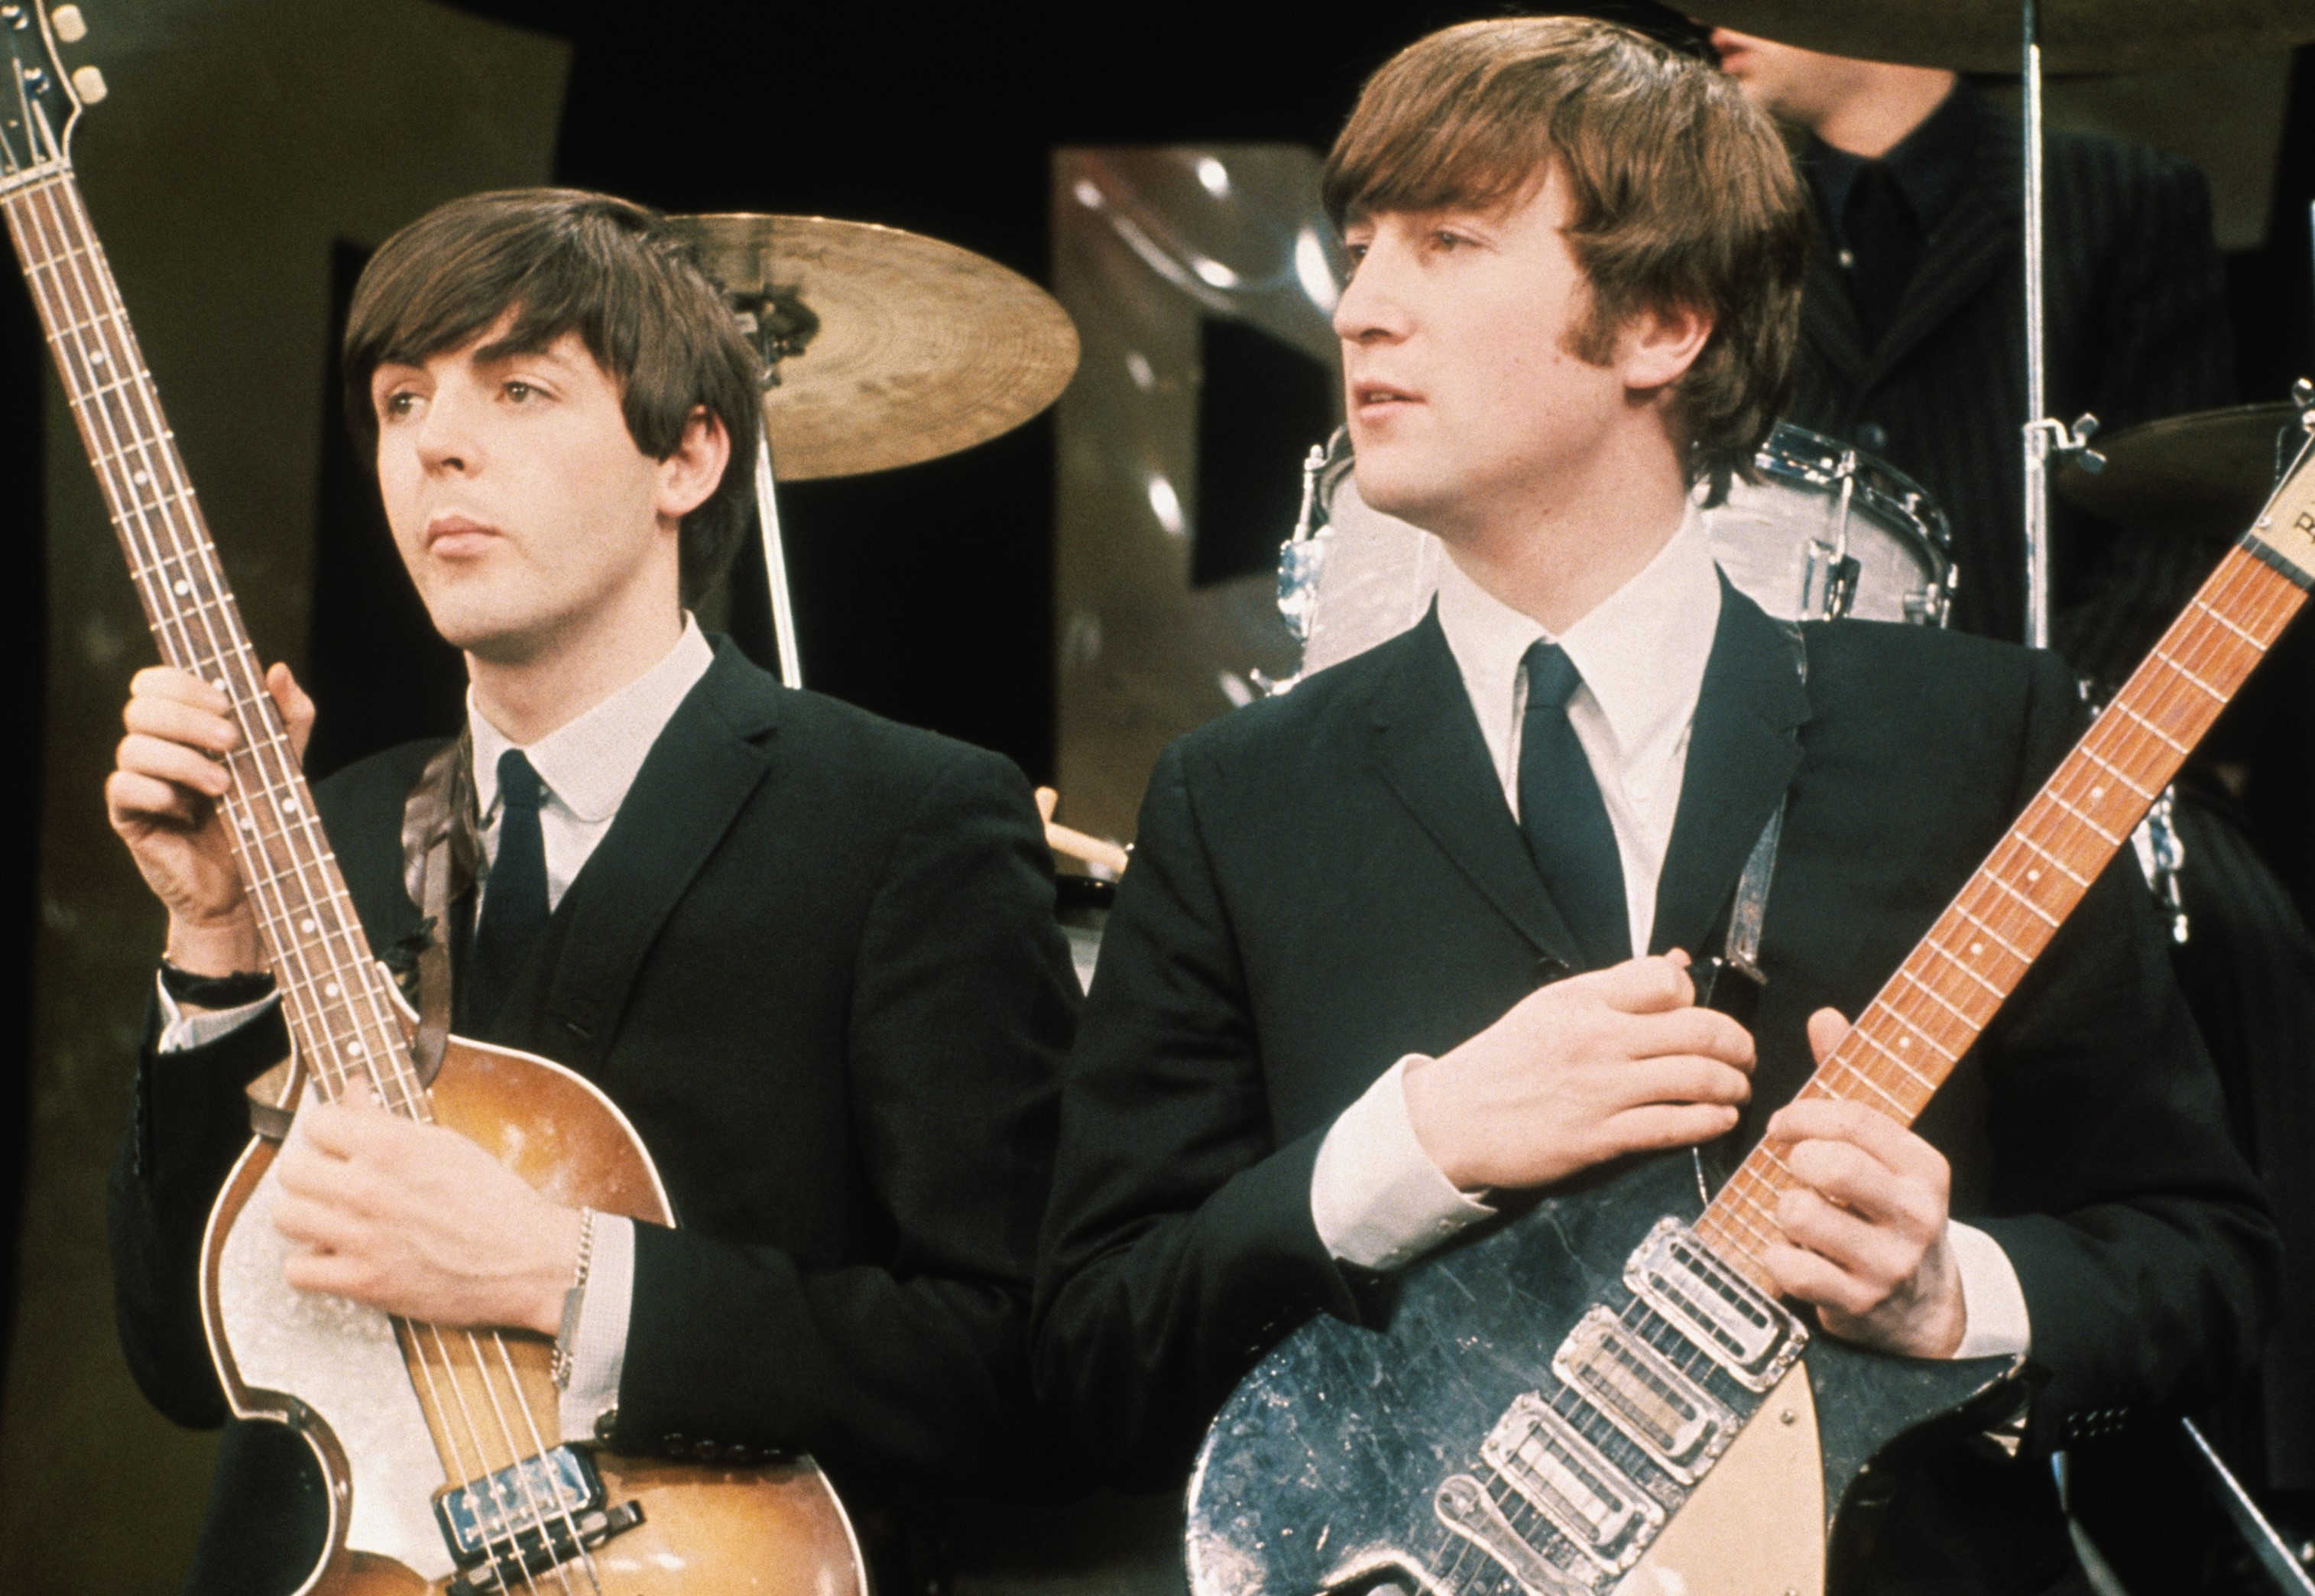 Paul McCartney and John Lennon holding guitars during The Beatles' "I Saw Her Standing There" era